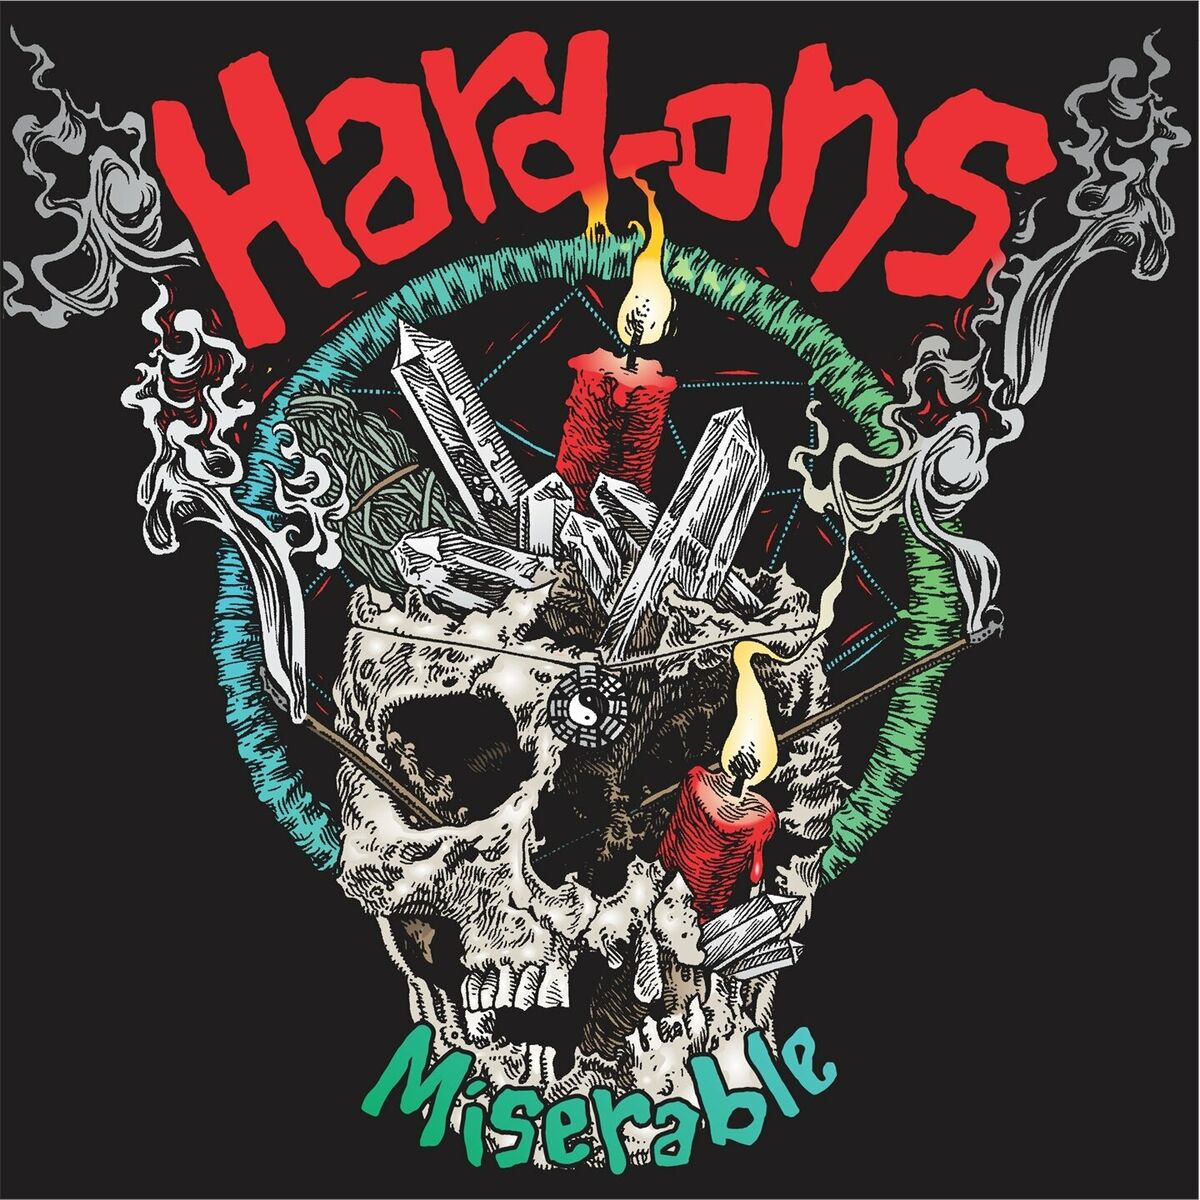 Hard-Ons: albums